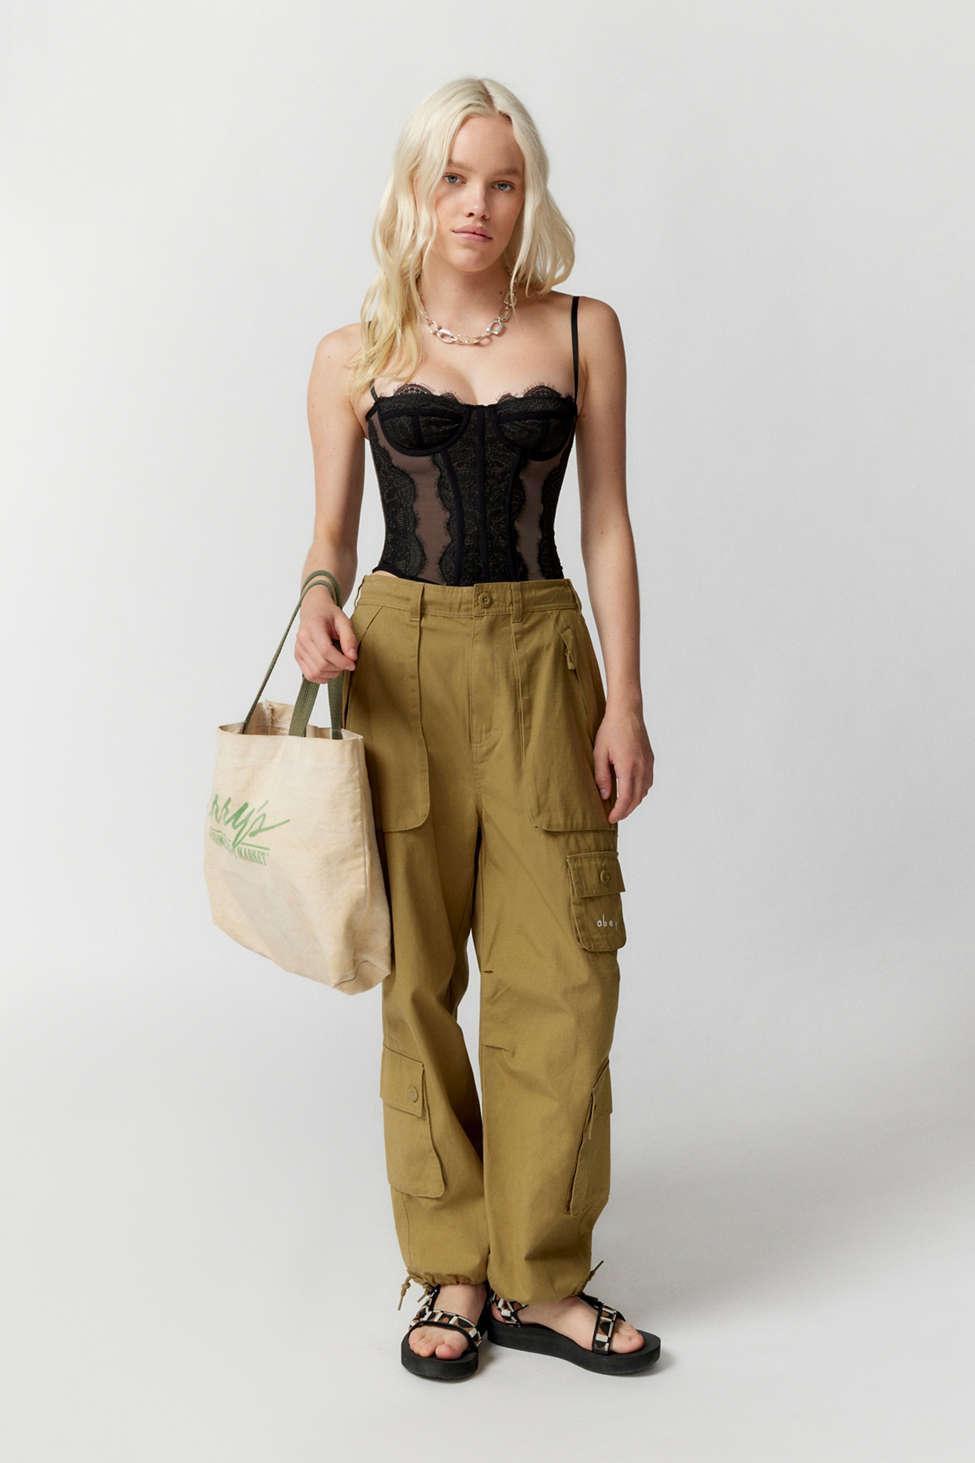 Out From Under Modern Love Lace Corset In Olive Green At Urban Outfitters